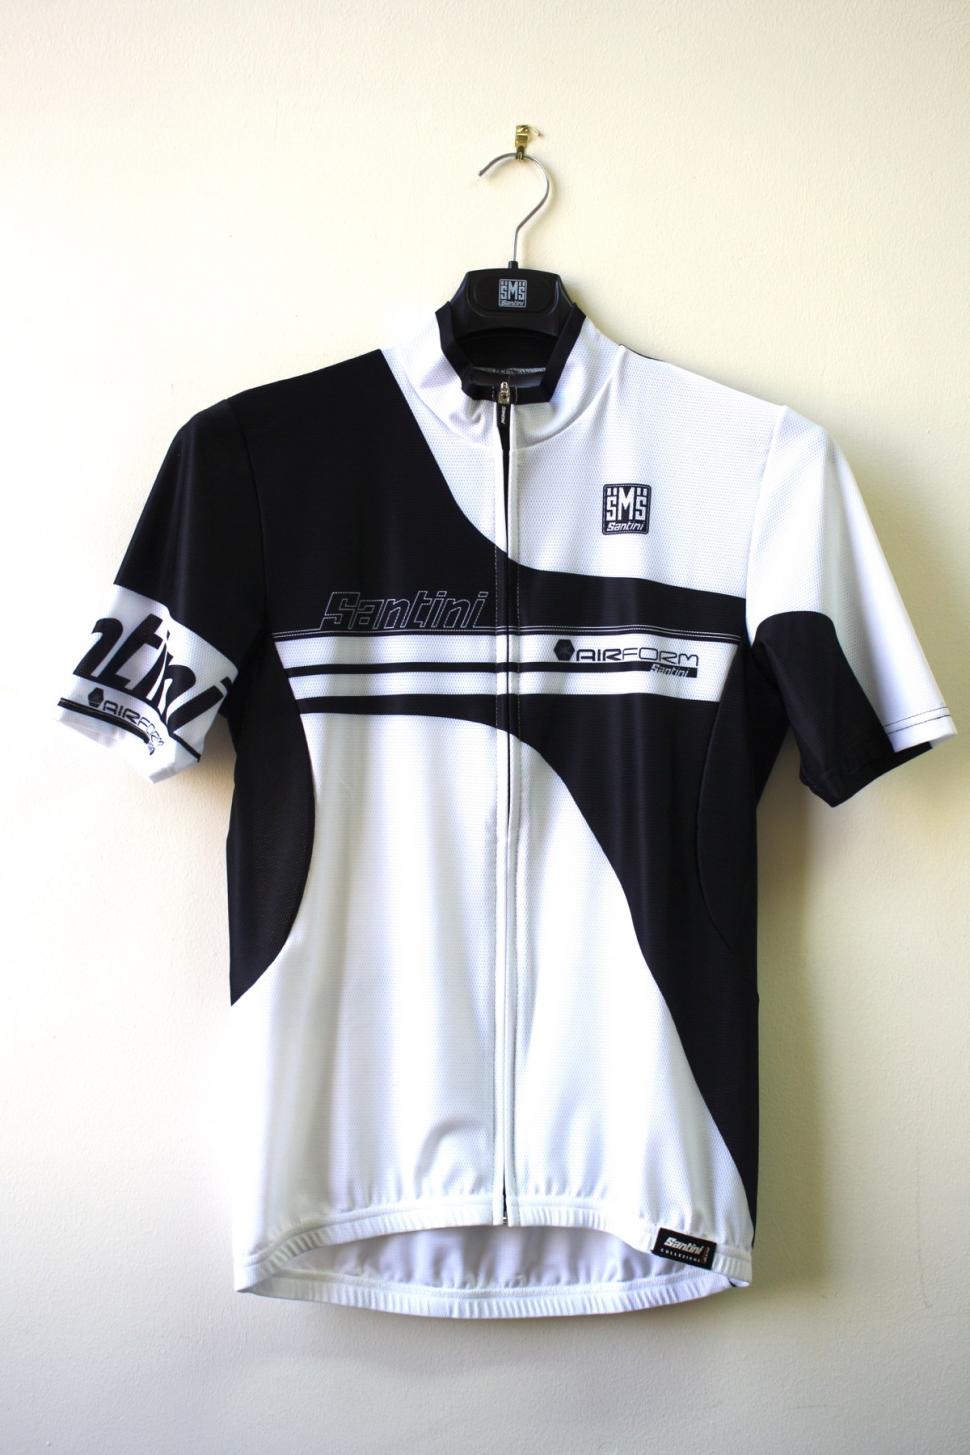 6 highlights from Santini’s summer clothing range | road.cc